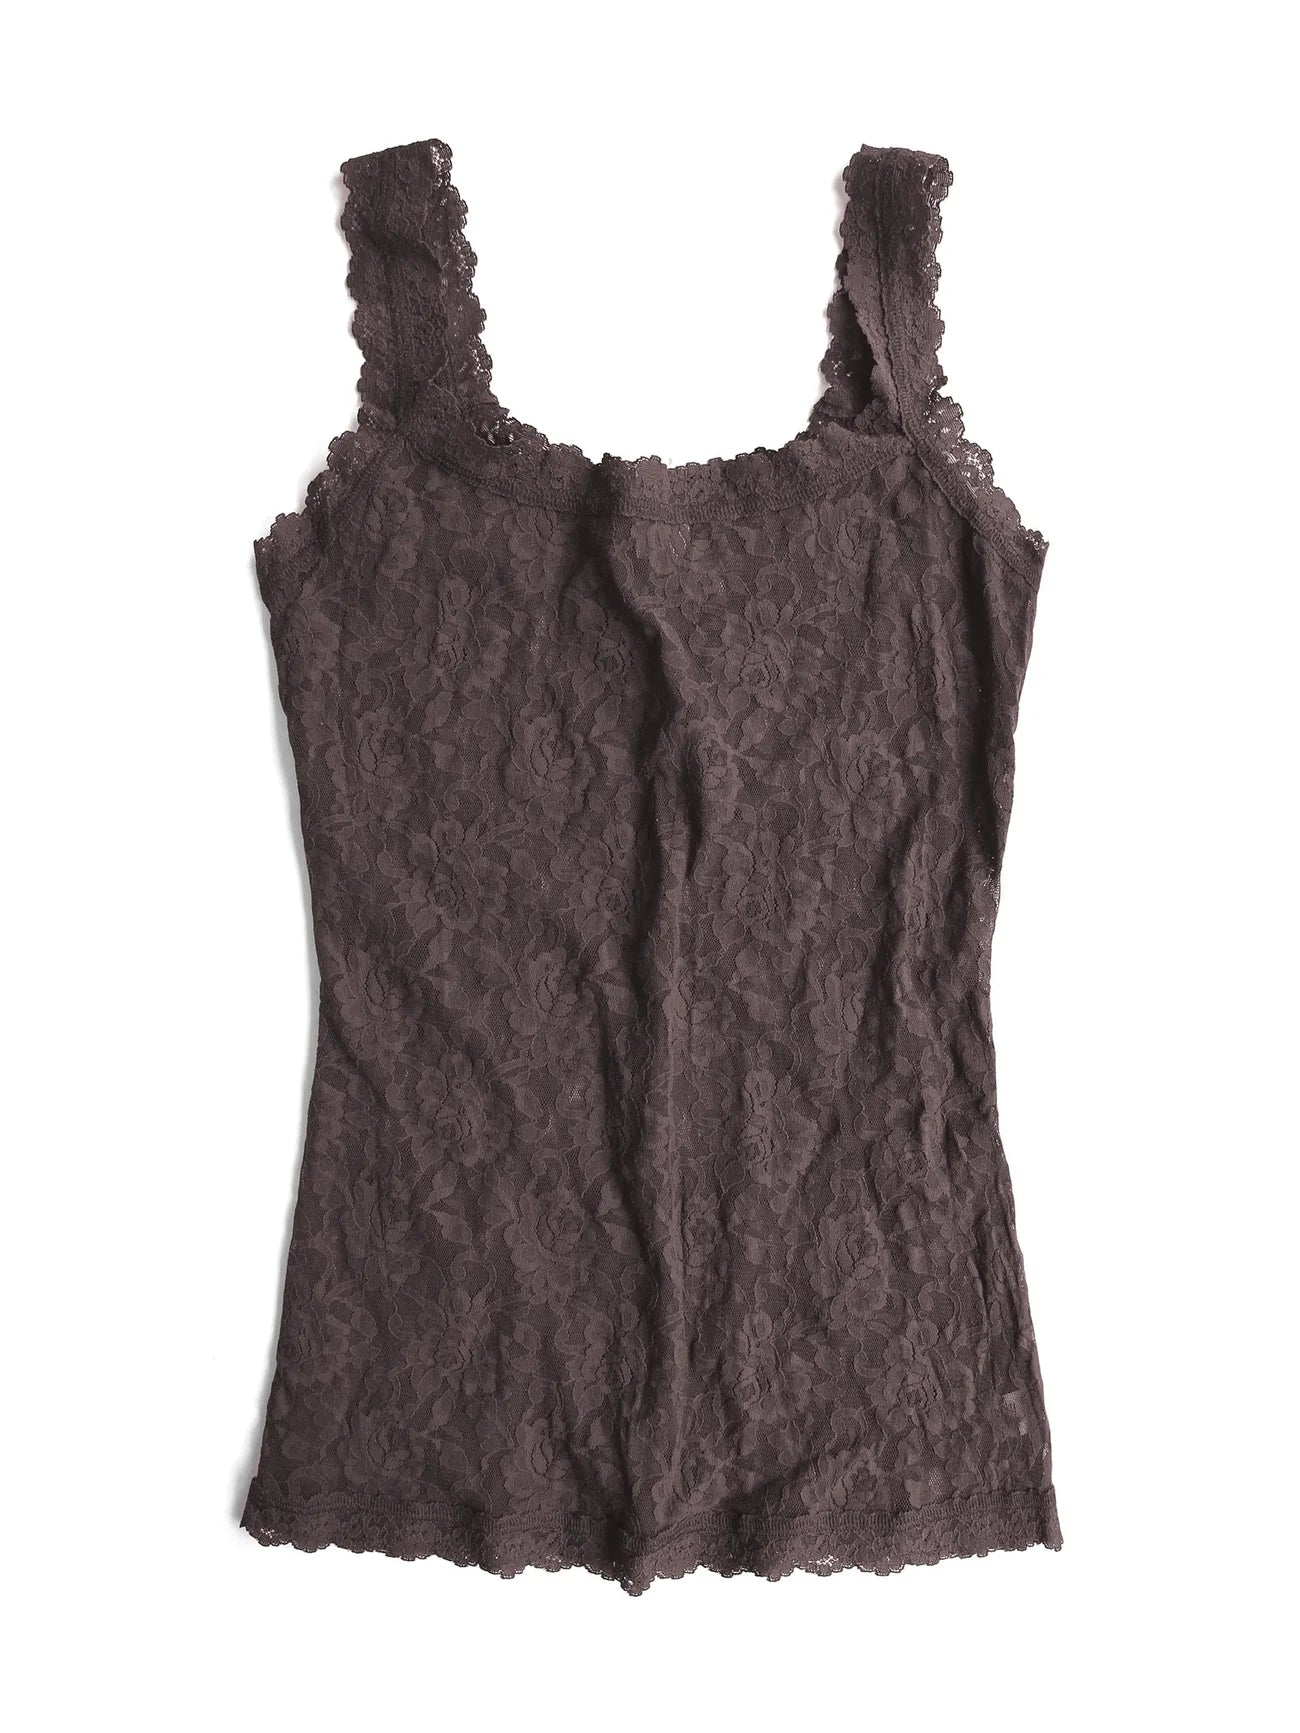 Buy Hanky Panky Women's Signature Lace Classic Camisole Granite X-Large at